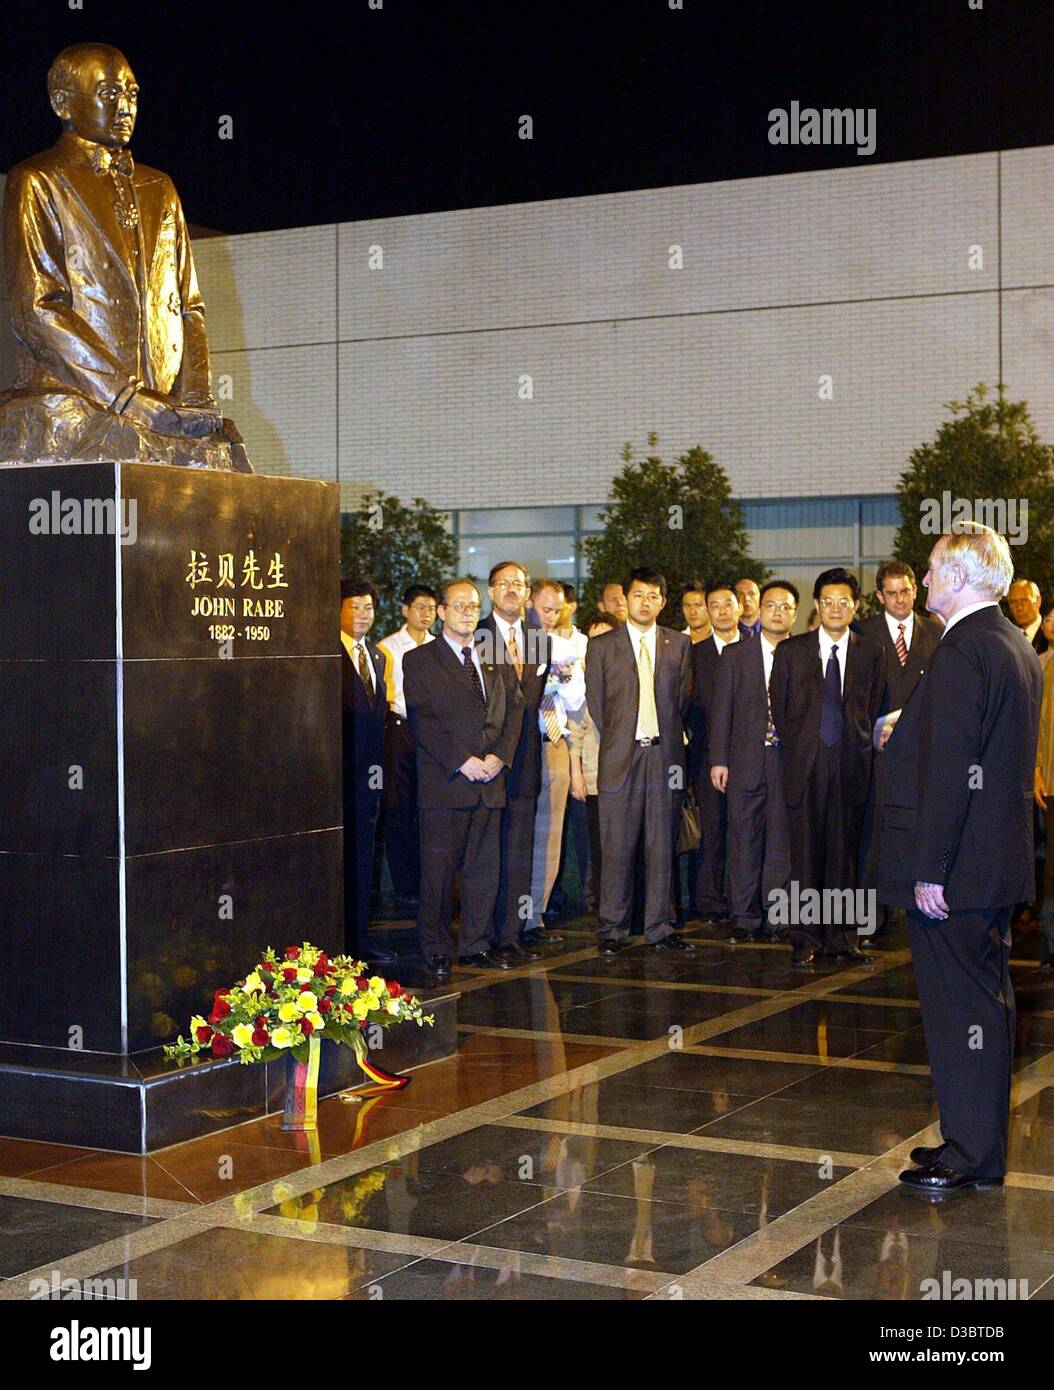 (dpa) - German President Johannes Rau lays down a wreath at the John Rabe Memorial in Nanjing, China, 13 September 2003. During World War II the German John Rabe, an employee of Siemens, helped to save many Chinese from a massacre by the Japanese army. The German President, being on a seven day stat Stock Photo